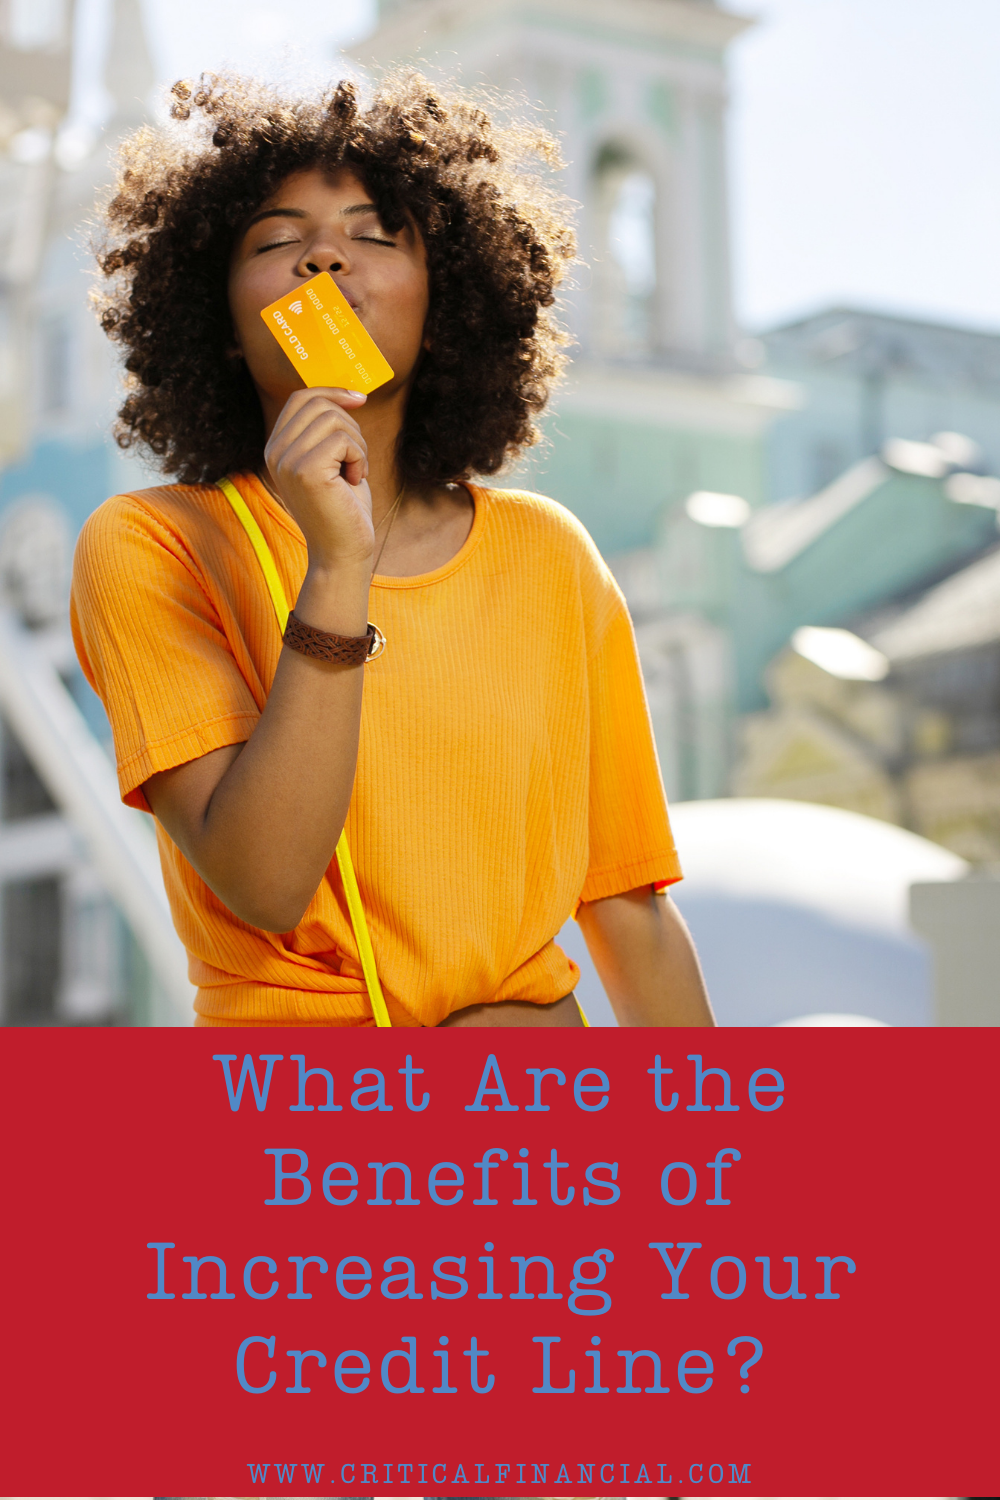 What Are the Benefits of Increasing Your Credit Line